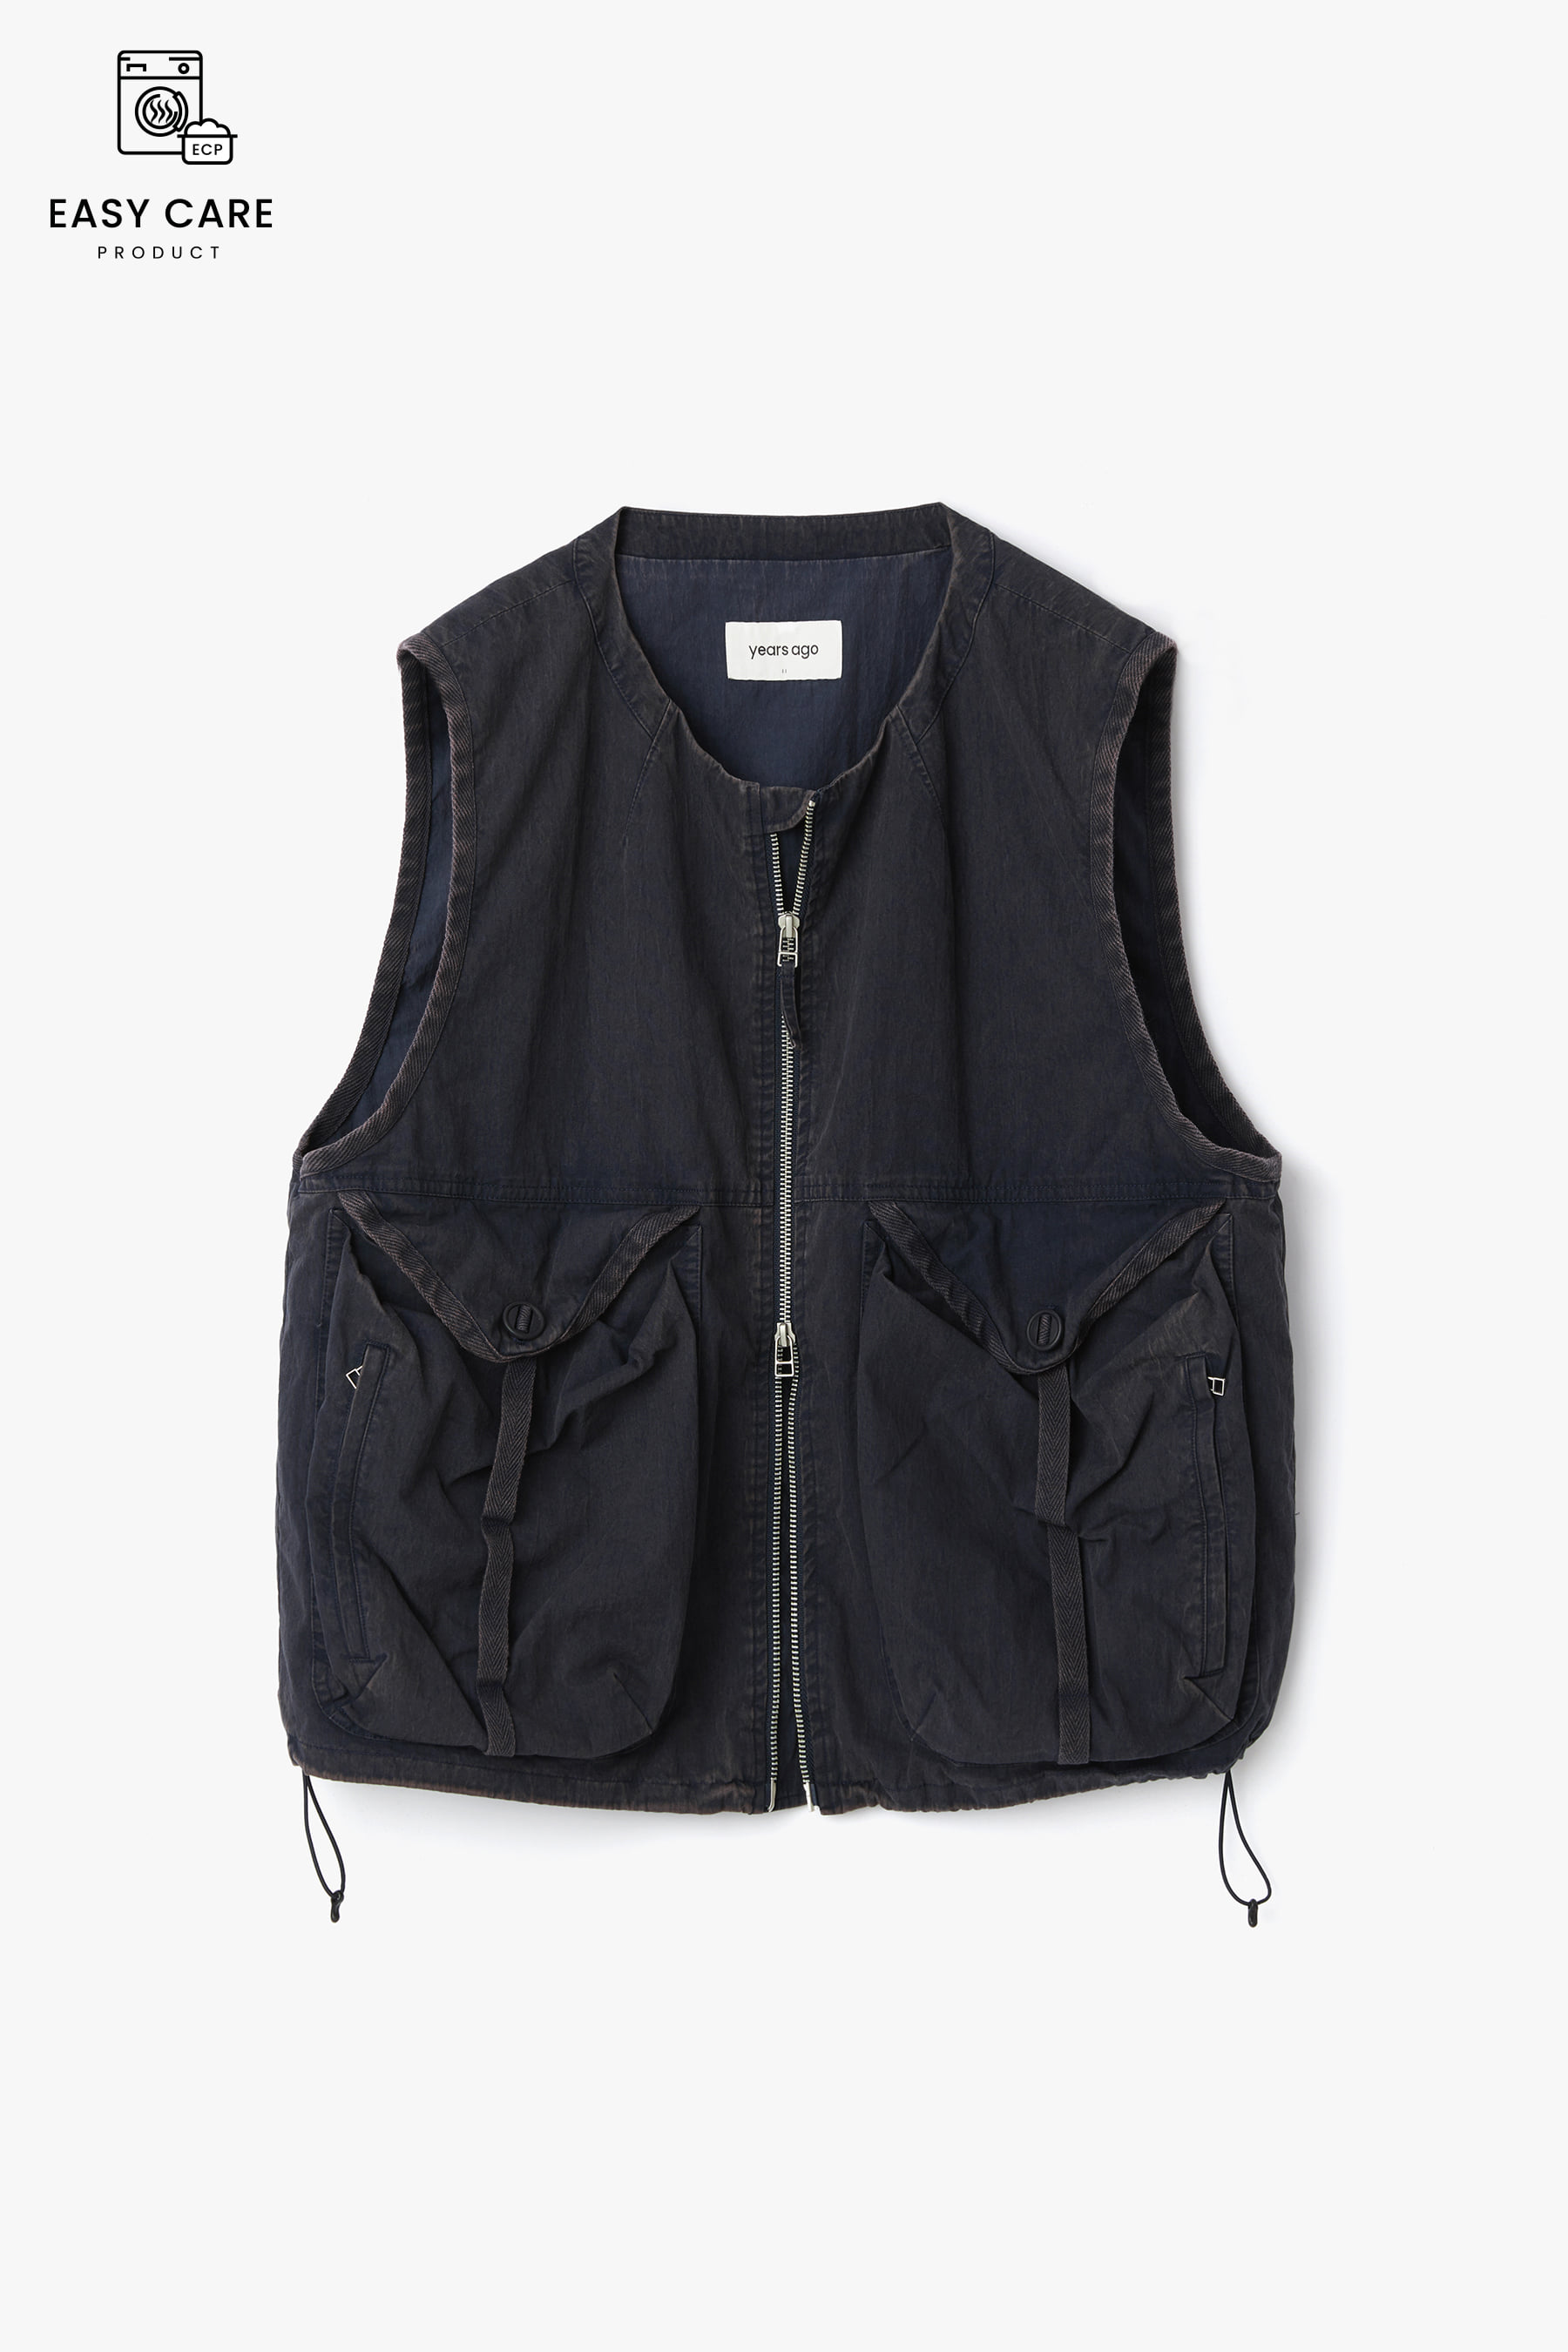 DUSTY NAVY OLD WASHED TACTICAL VEST (ECP GARMENT PROCESS)